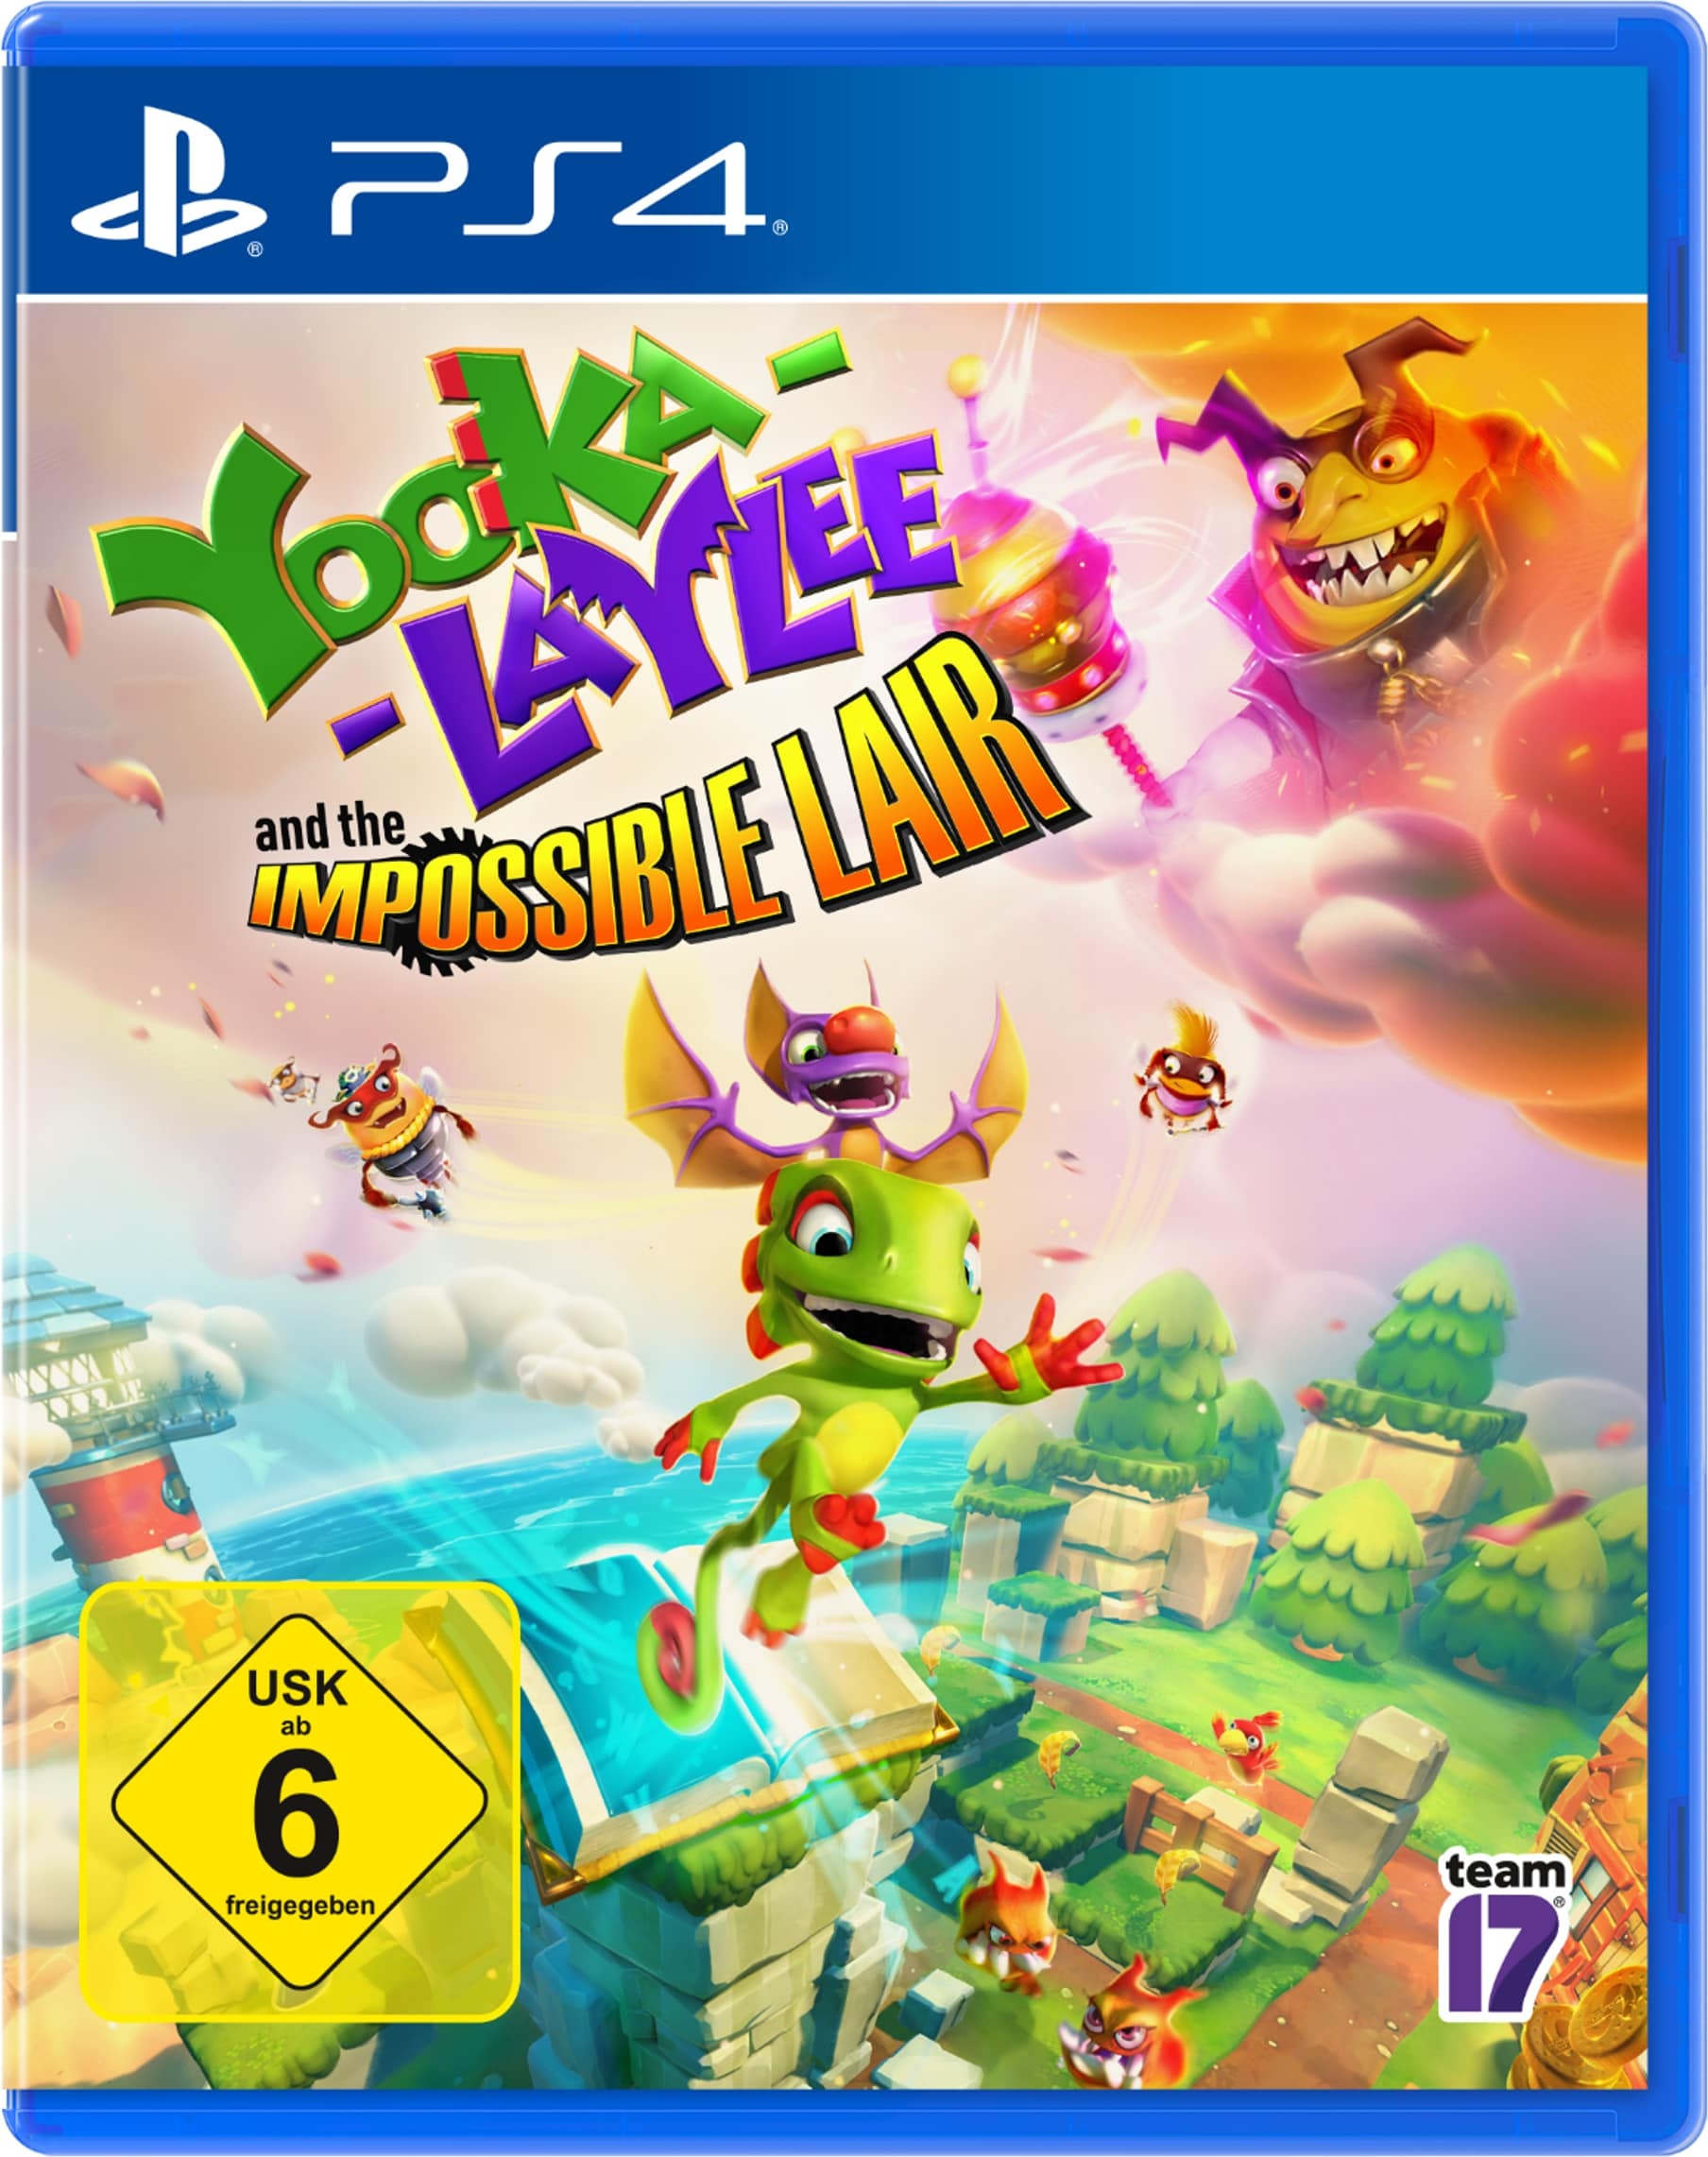 Team17, Yooka-Laylee and the Impossible Lair